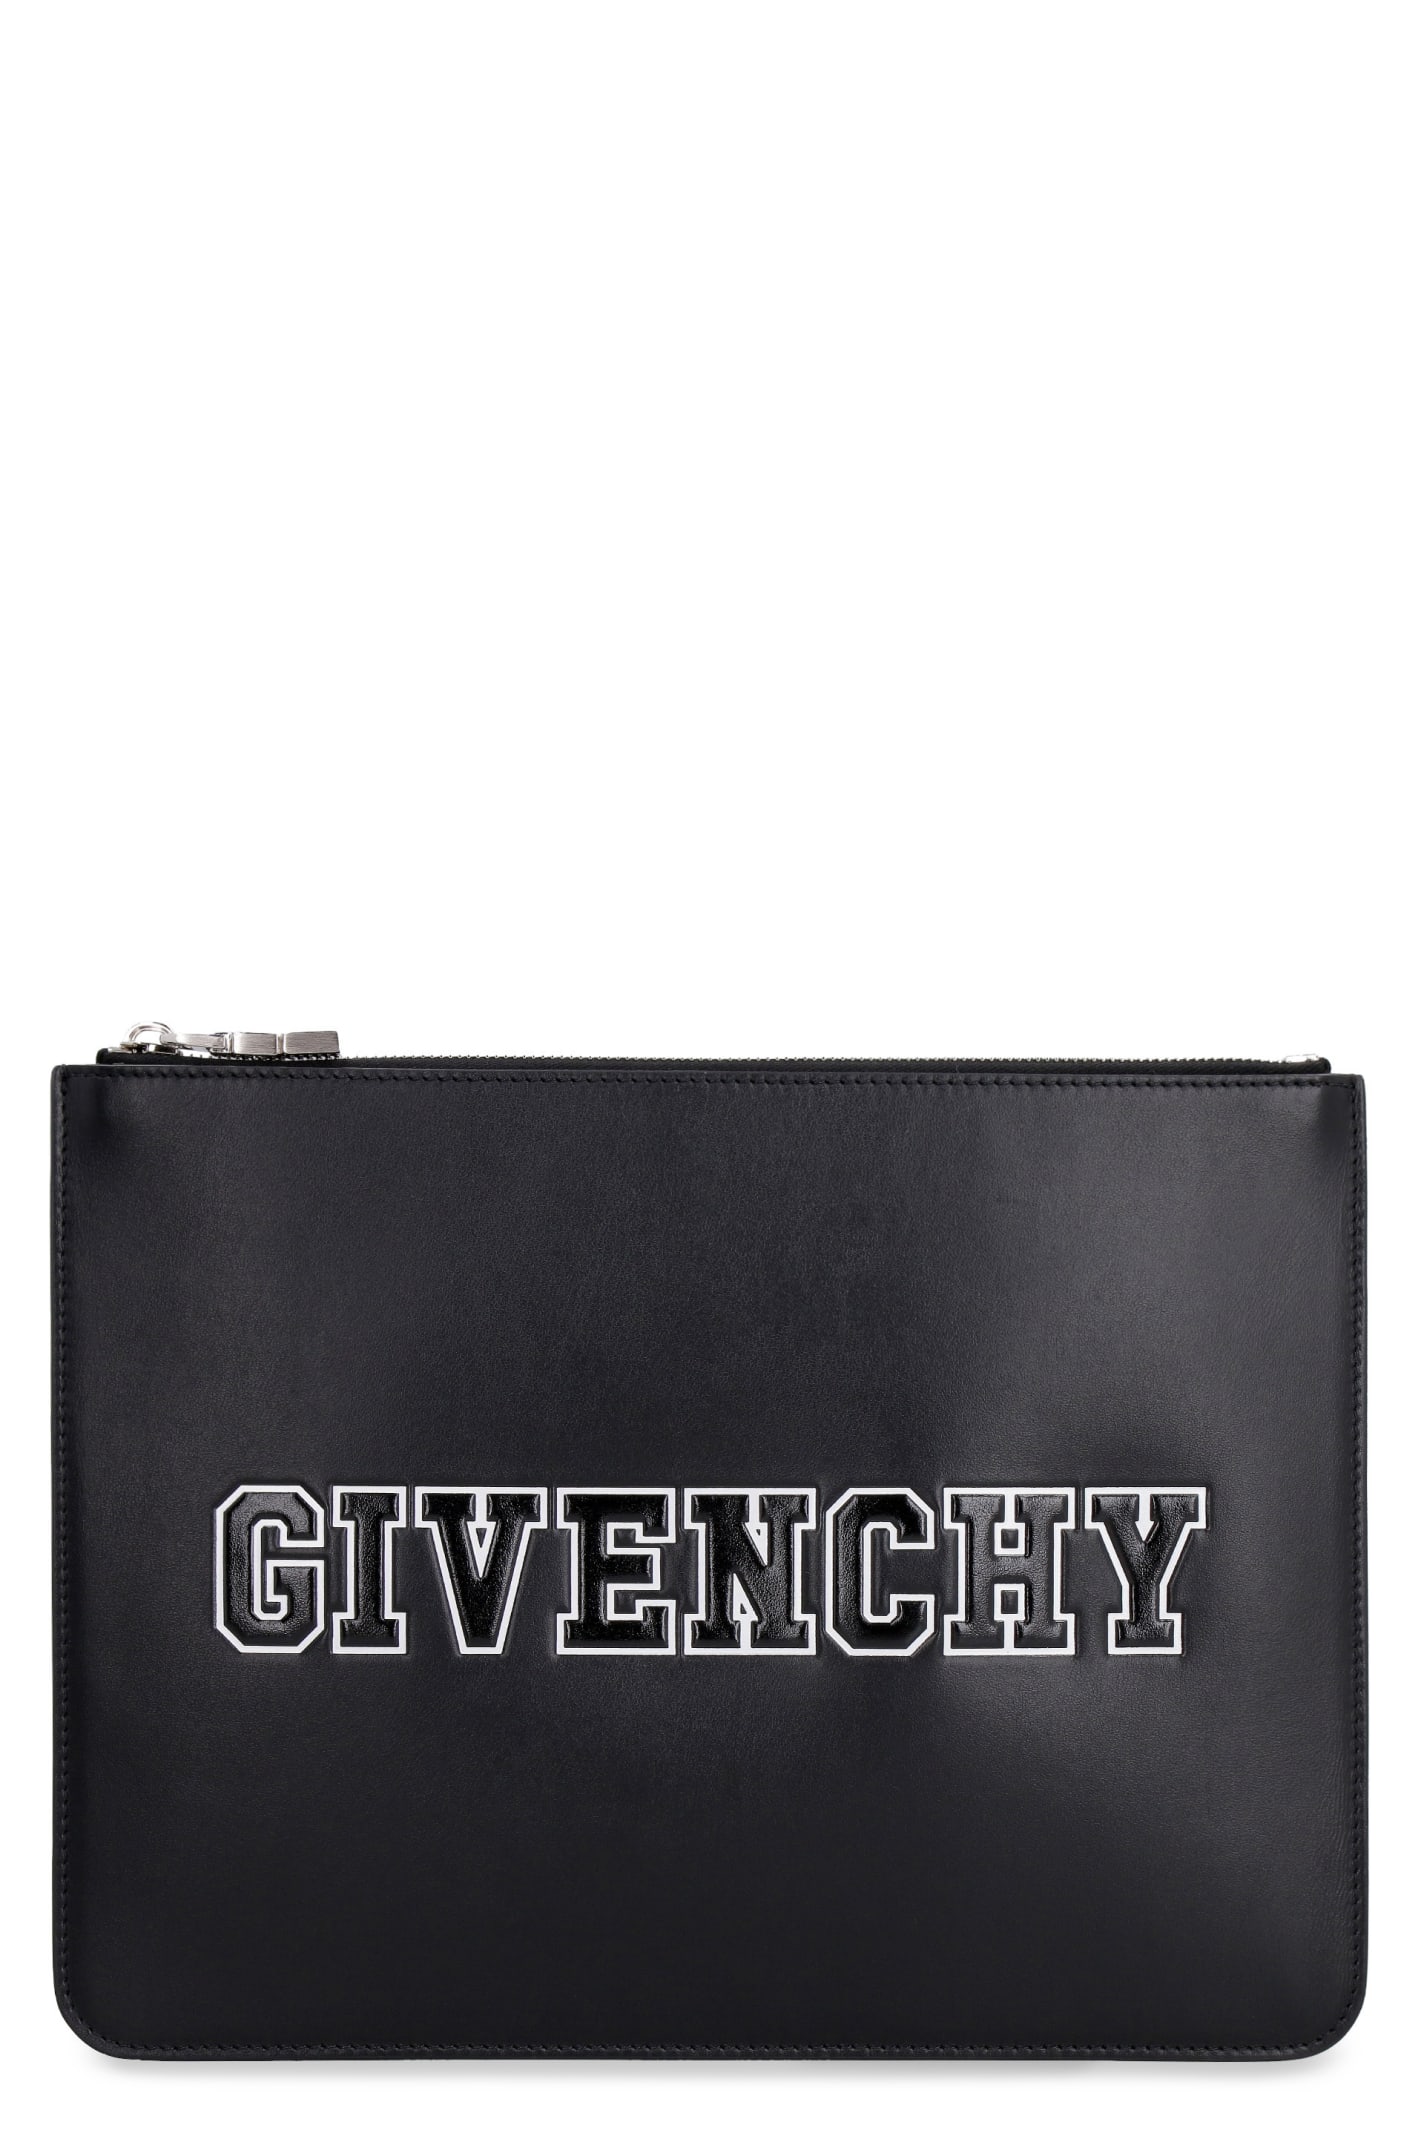 Givenchy Leather Flat Pouch